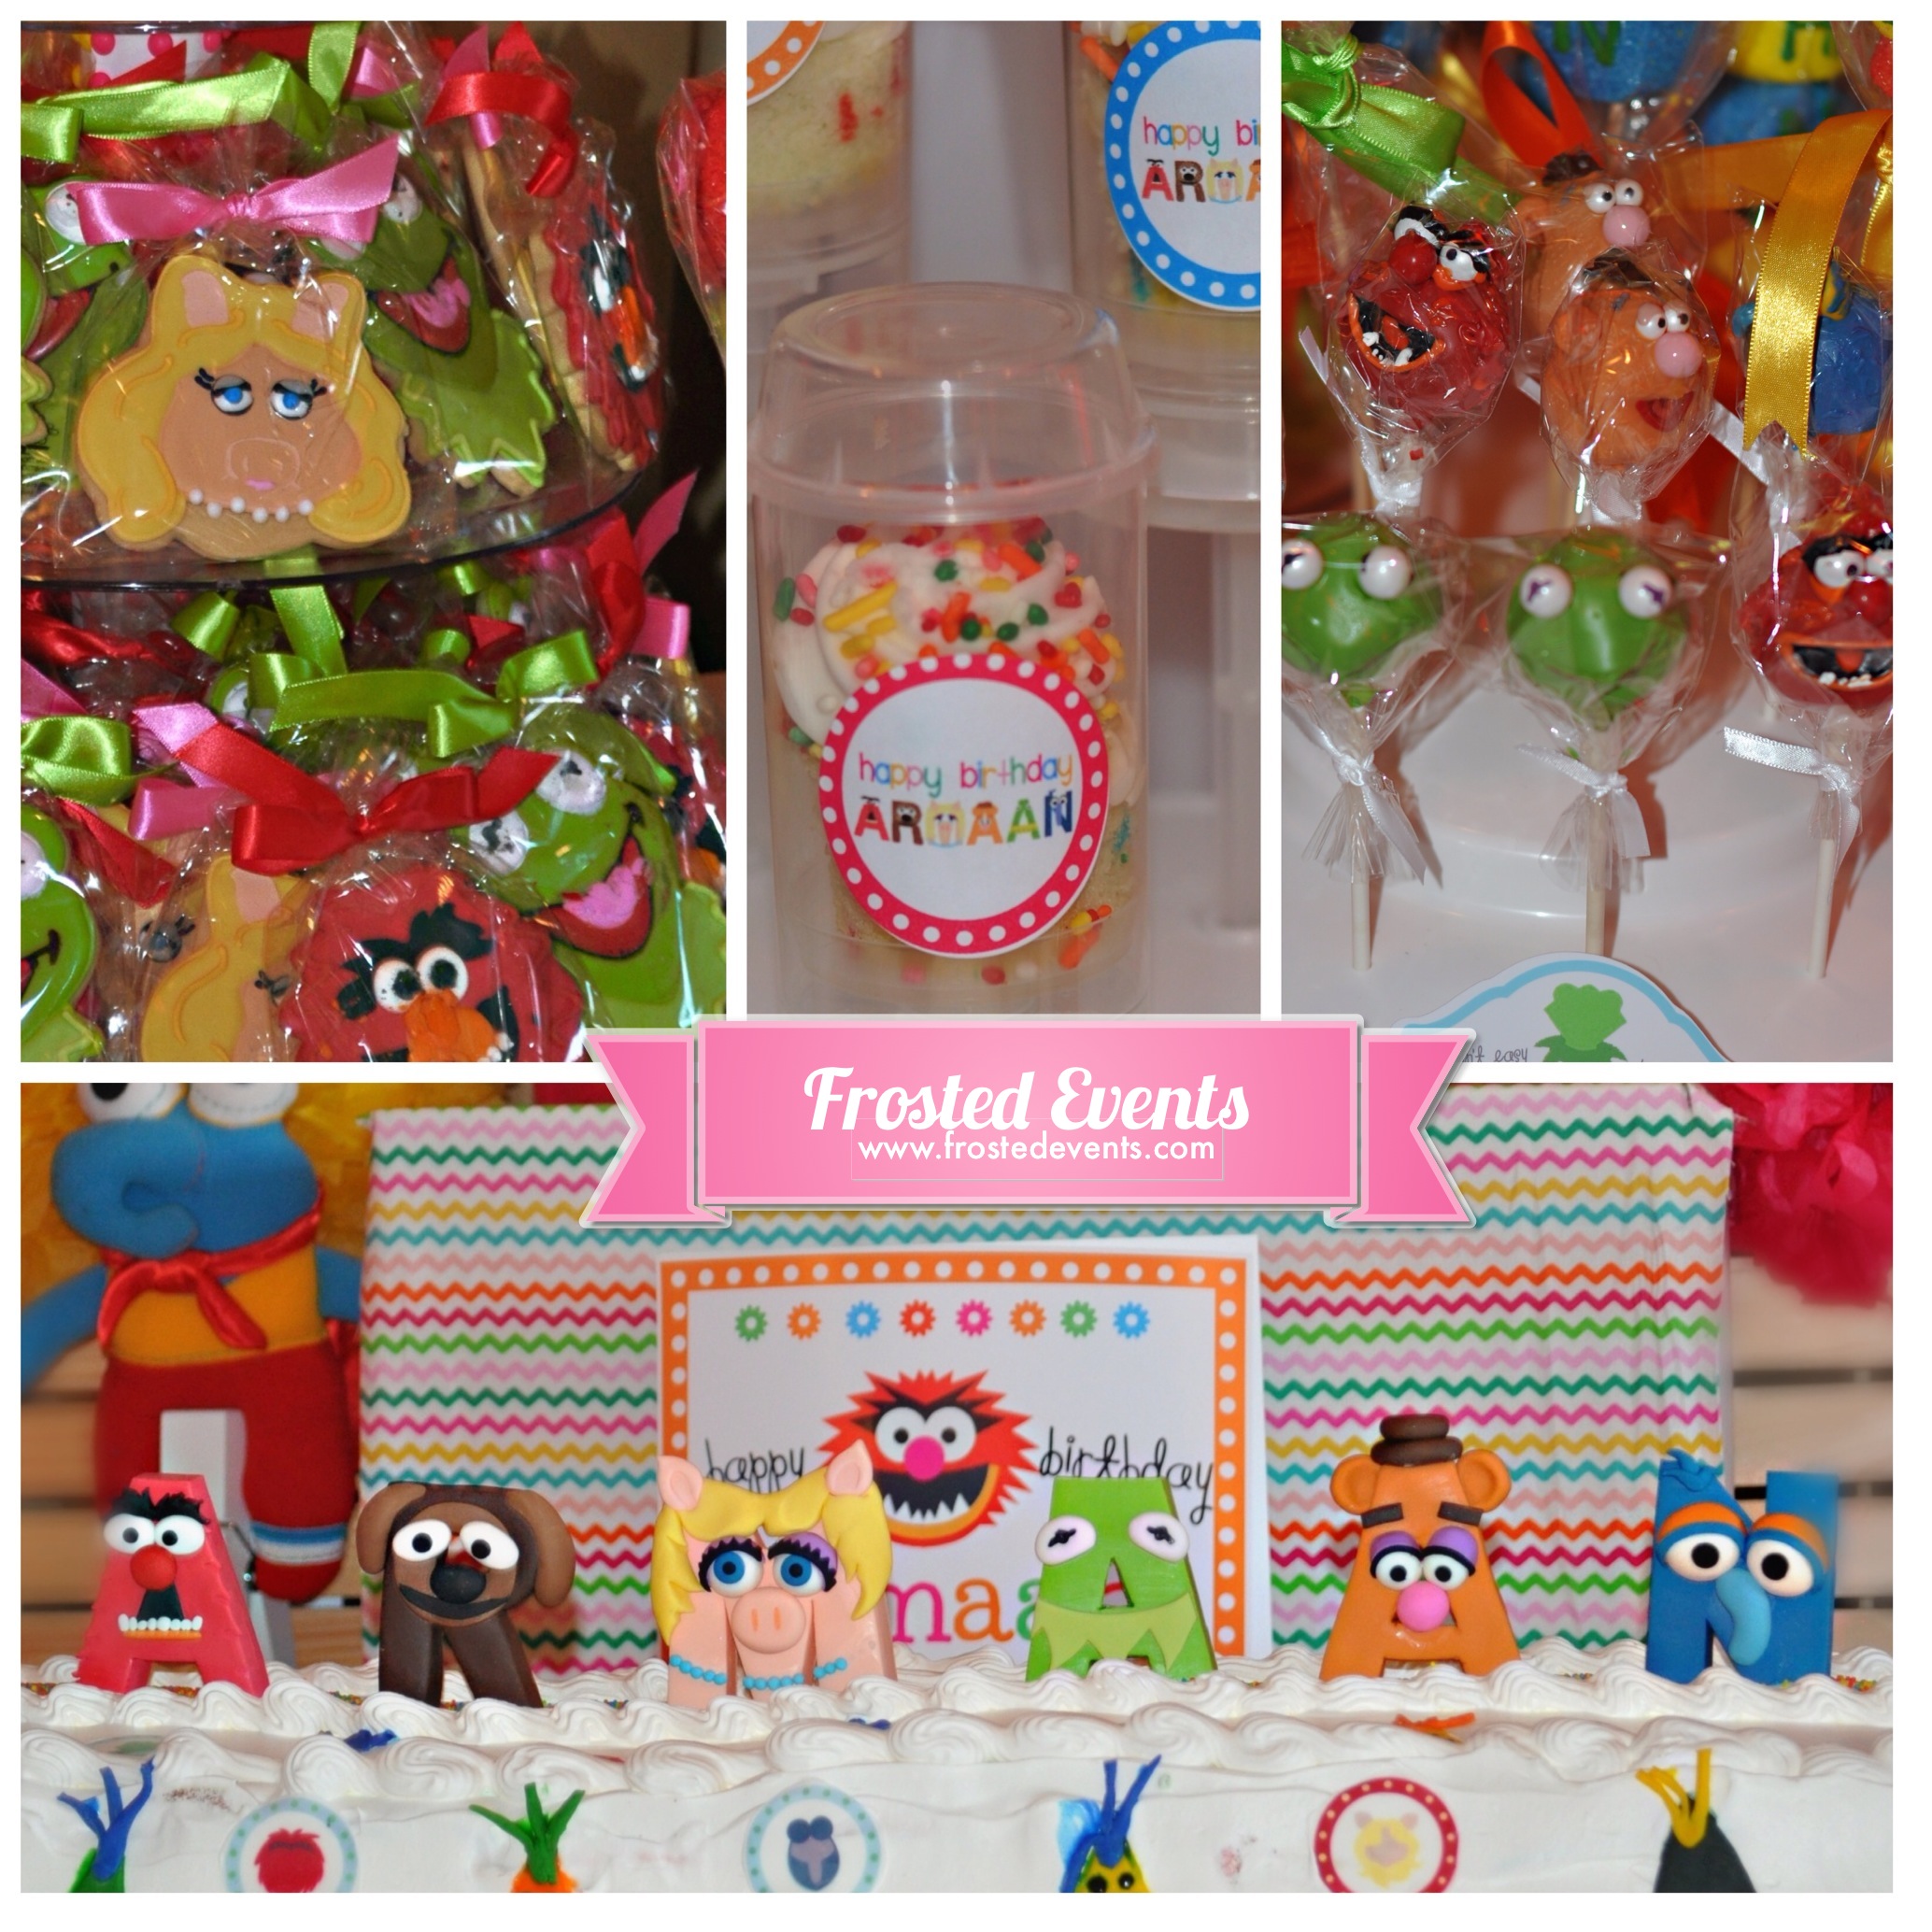 Muppet Theme First Birthday by Frosted Events www.frostedvents.com